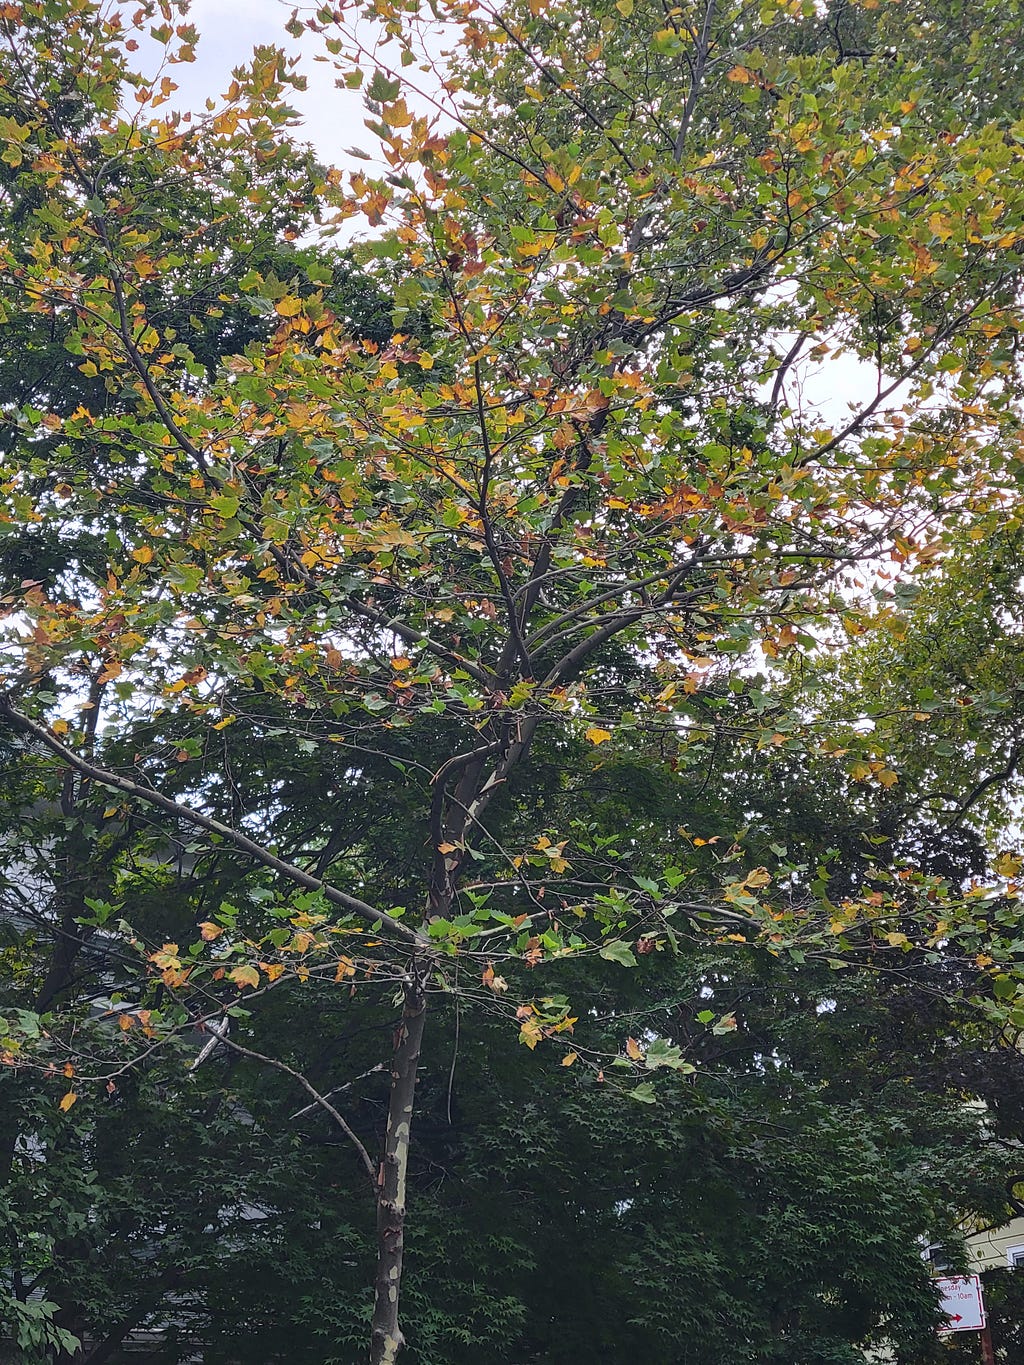 Young tree, half of its leaves are green and the other half are yellowed and shriveling.